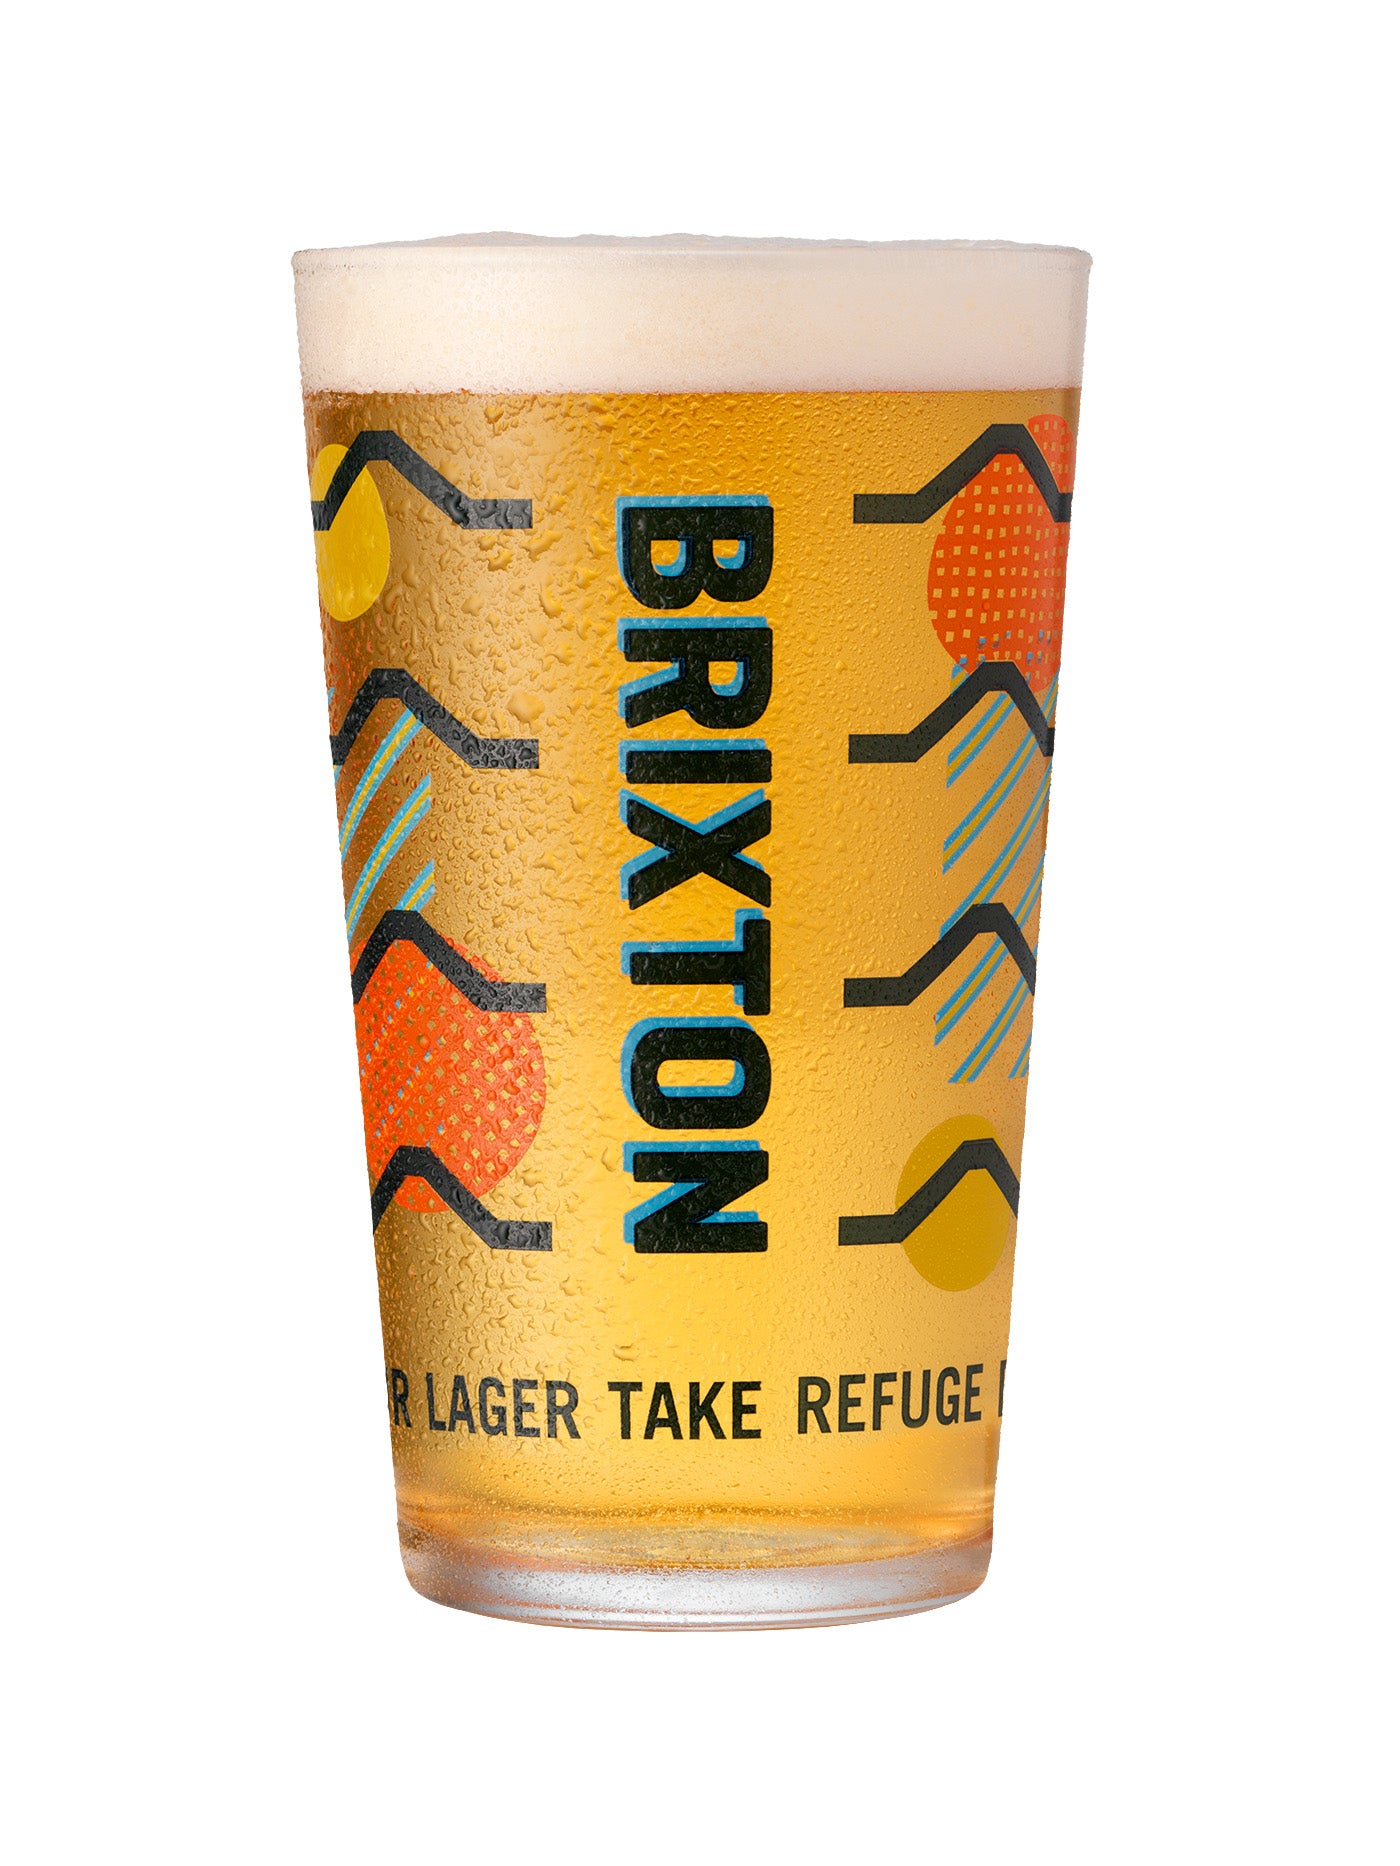 Brixton Brewery Coldharbour Lager Pint Glass